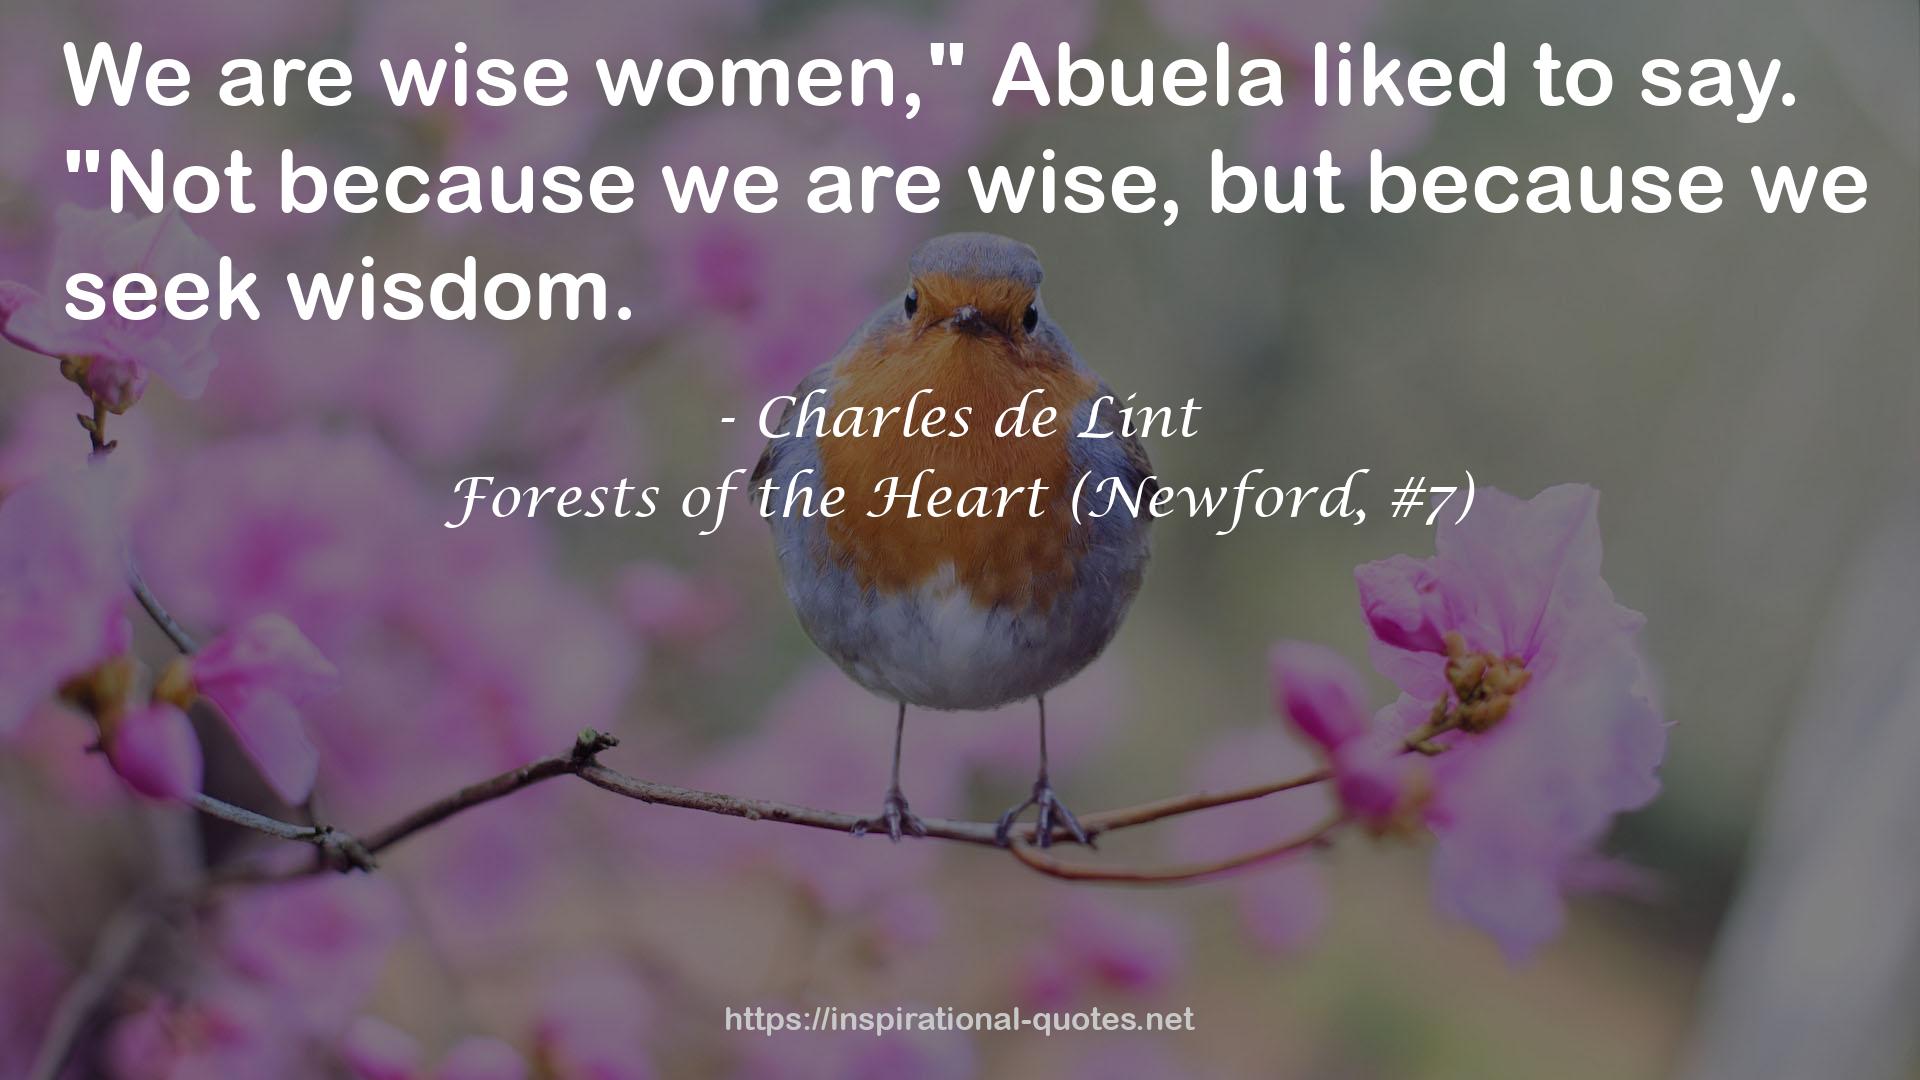 Forests of the Heart (Newford, #7) QUOTES